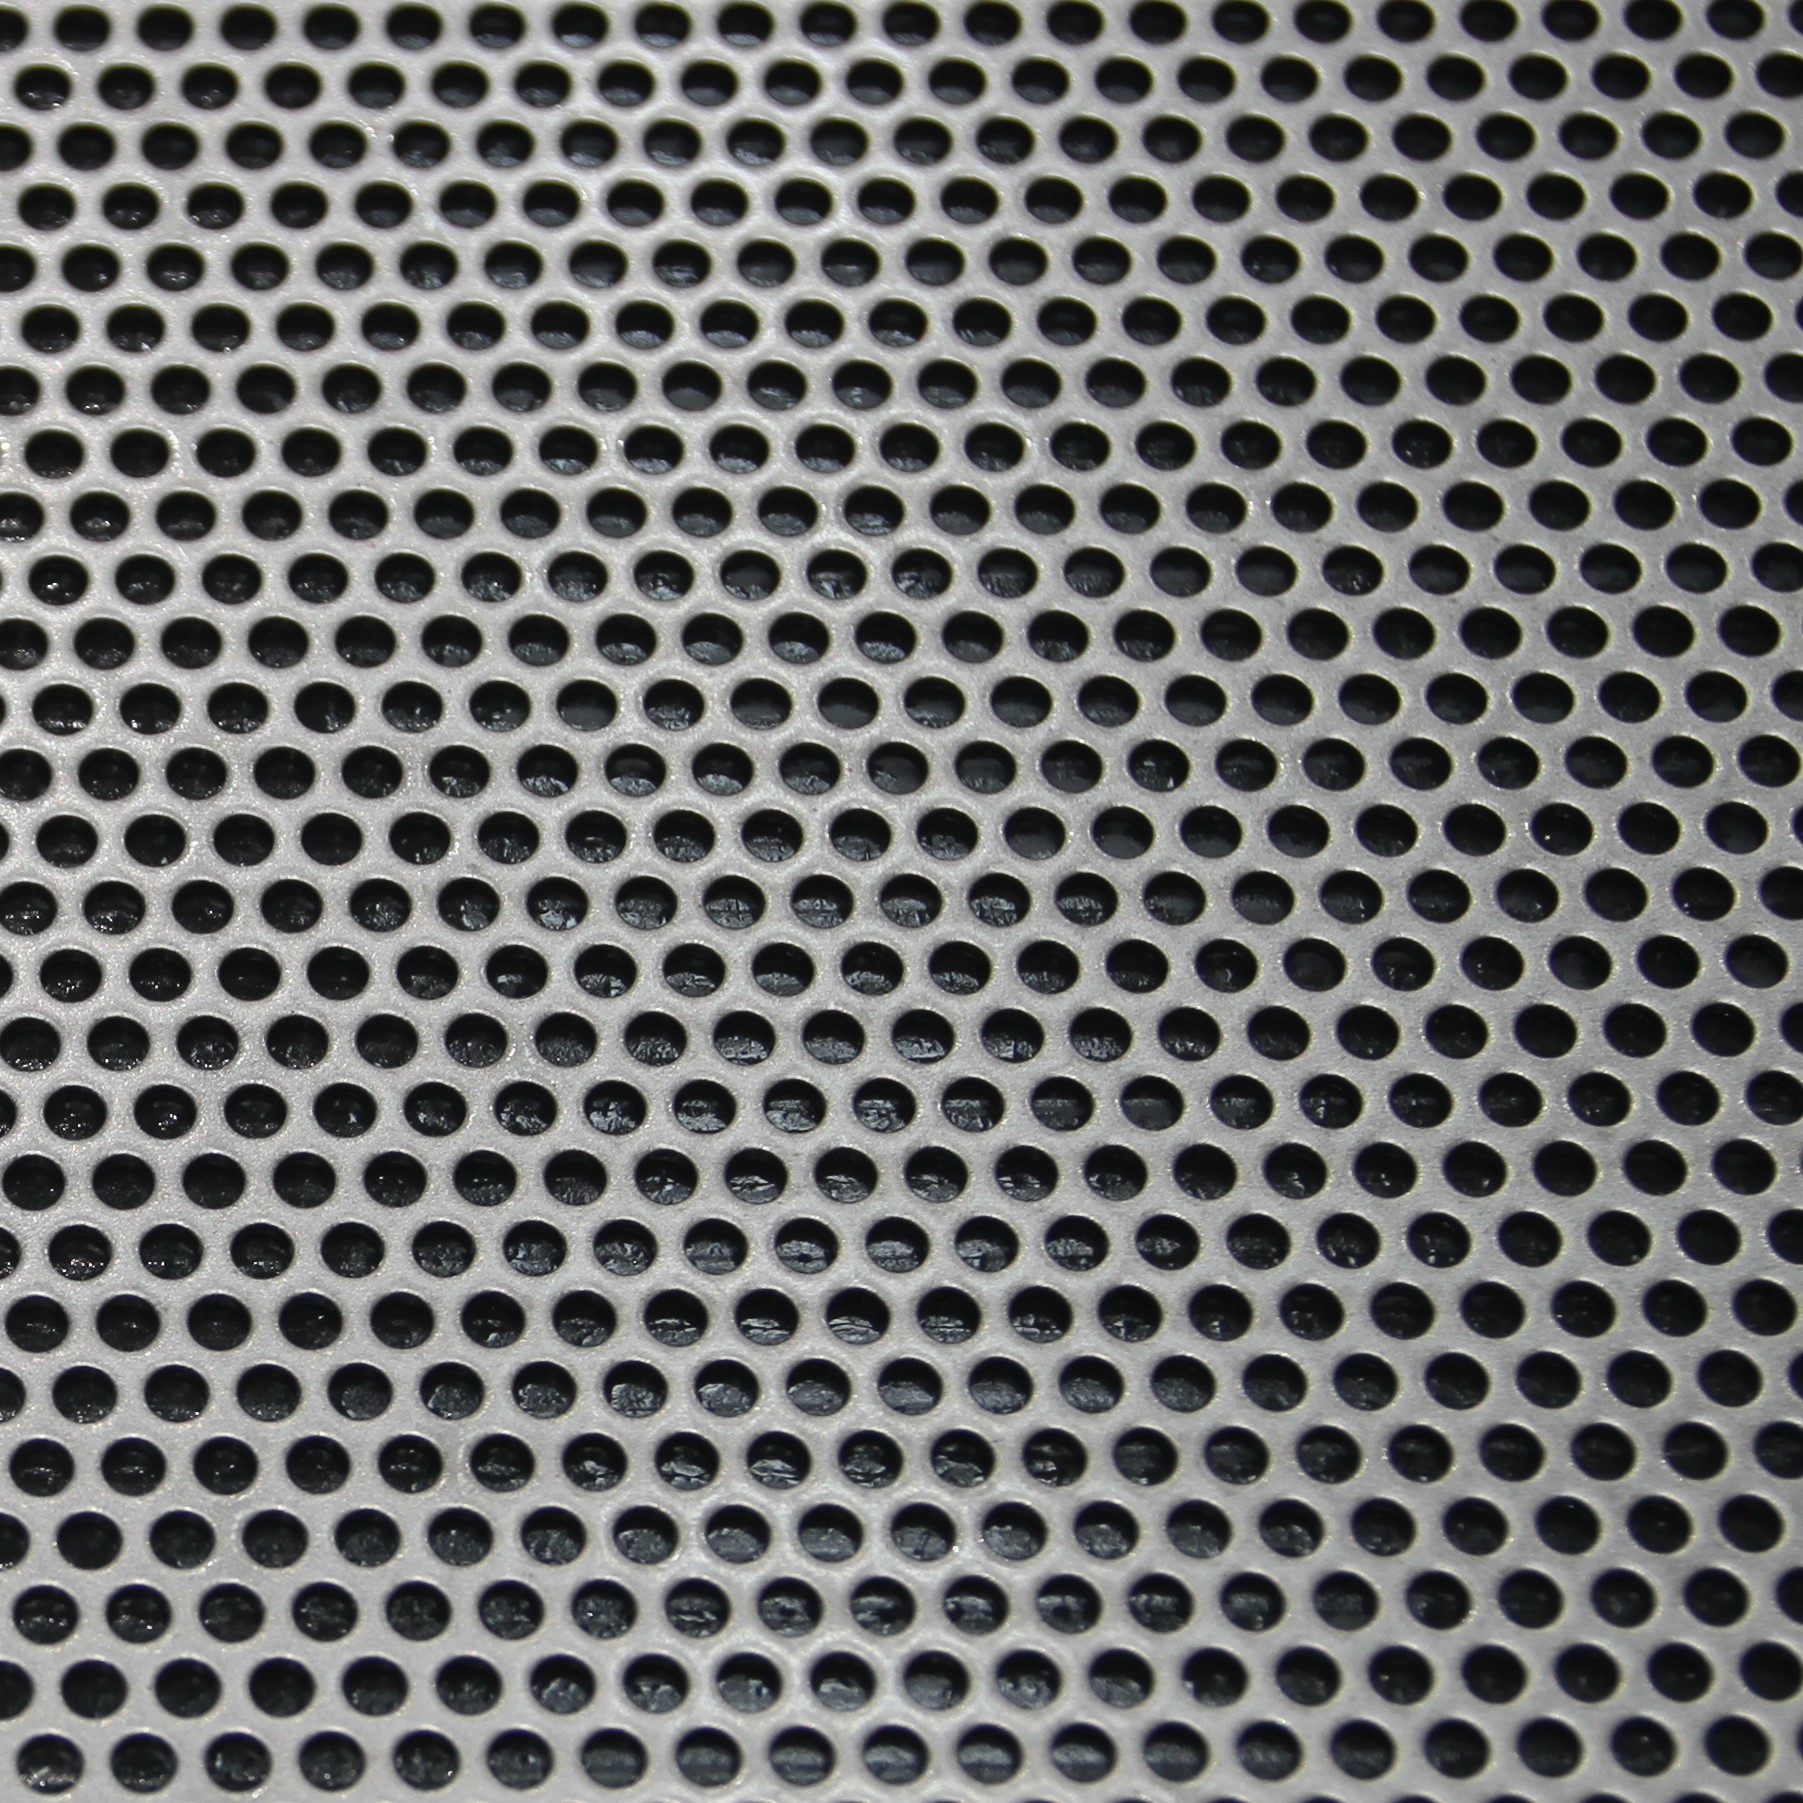 R03240 Perforated Metal Sheet: 3.2mm Round, 40% Open Area ...